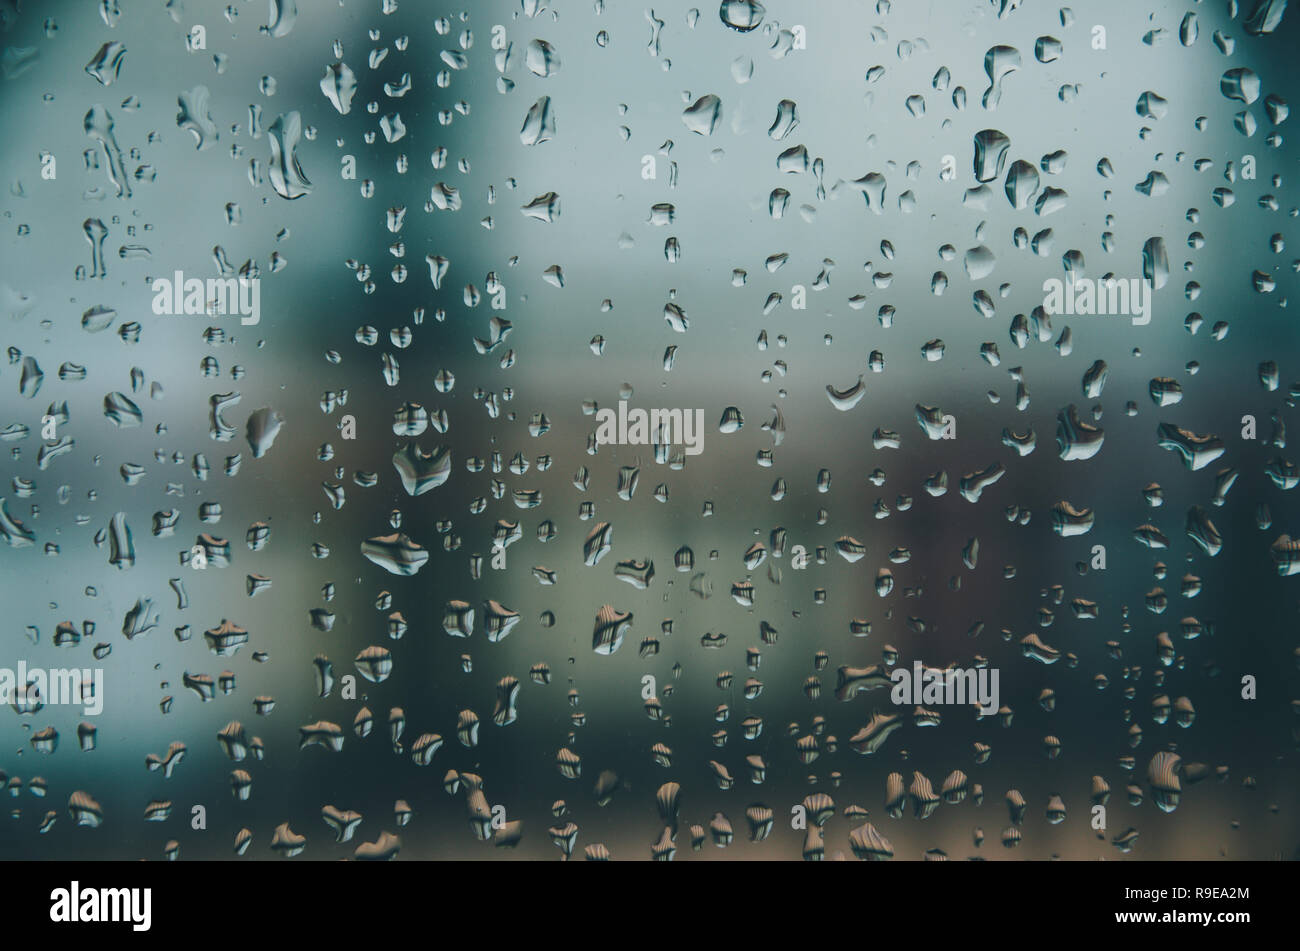 Wallpaper of rain drops or water drops on the glass, Vintage background by  rainy drop on window, Rainy day with raindrop on the glass, Texture of wate  Stock Photo - Alamy